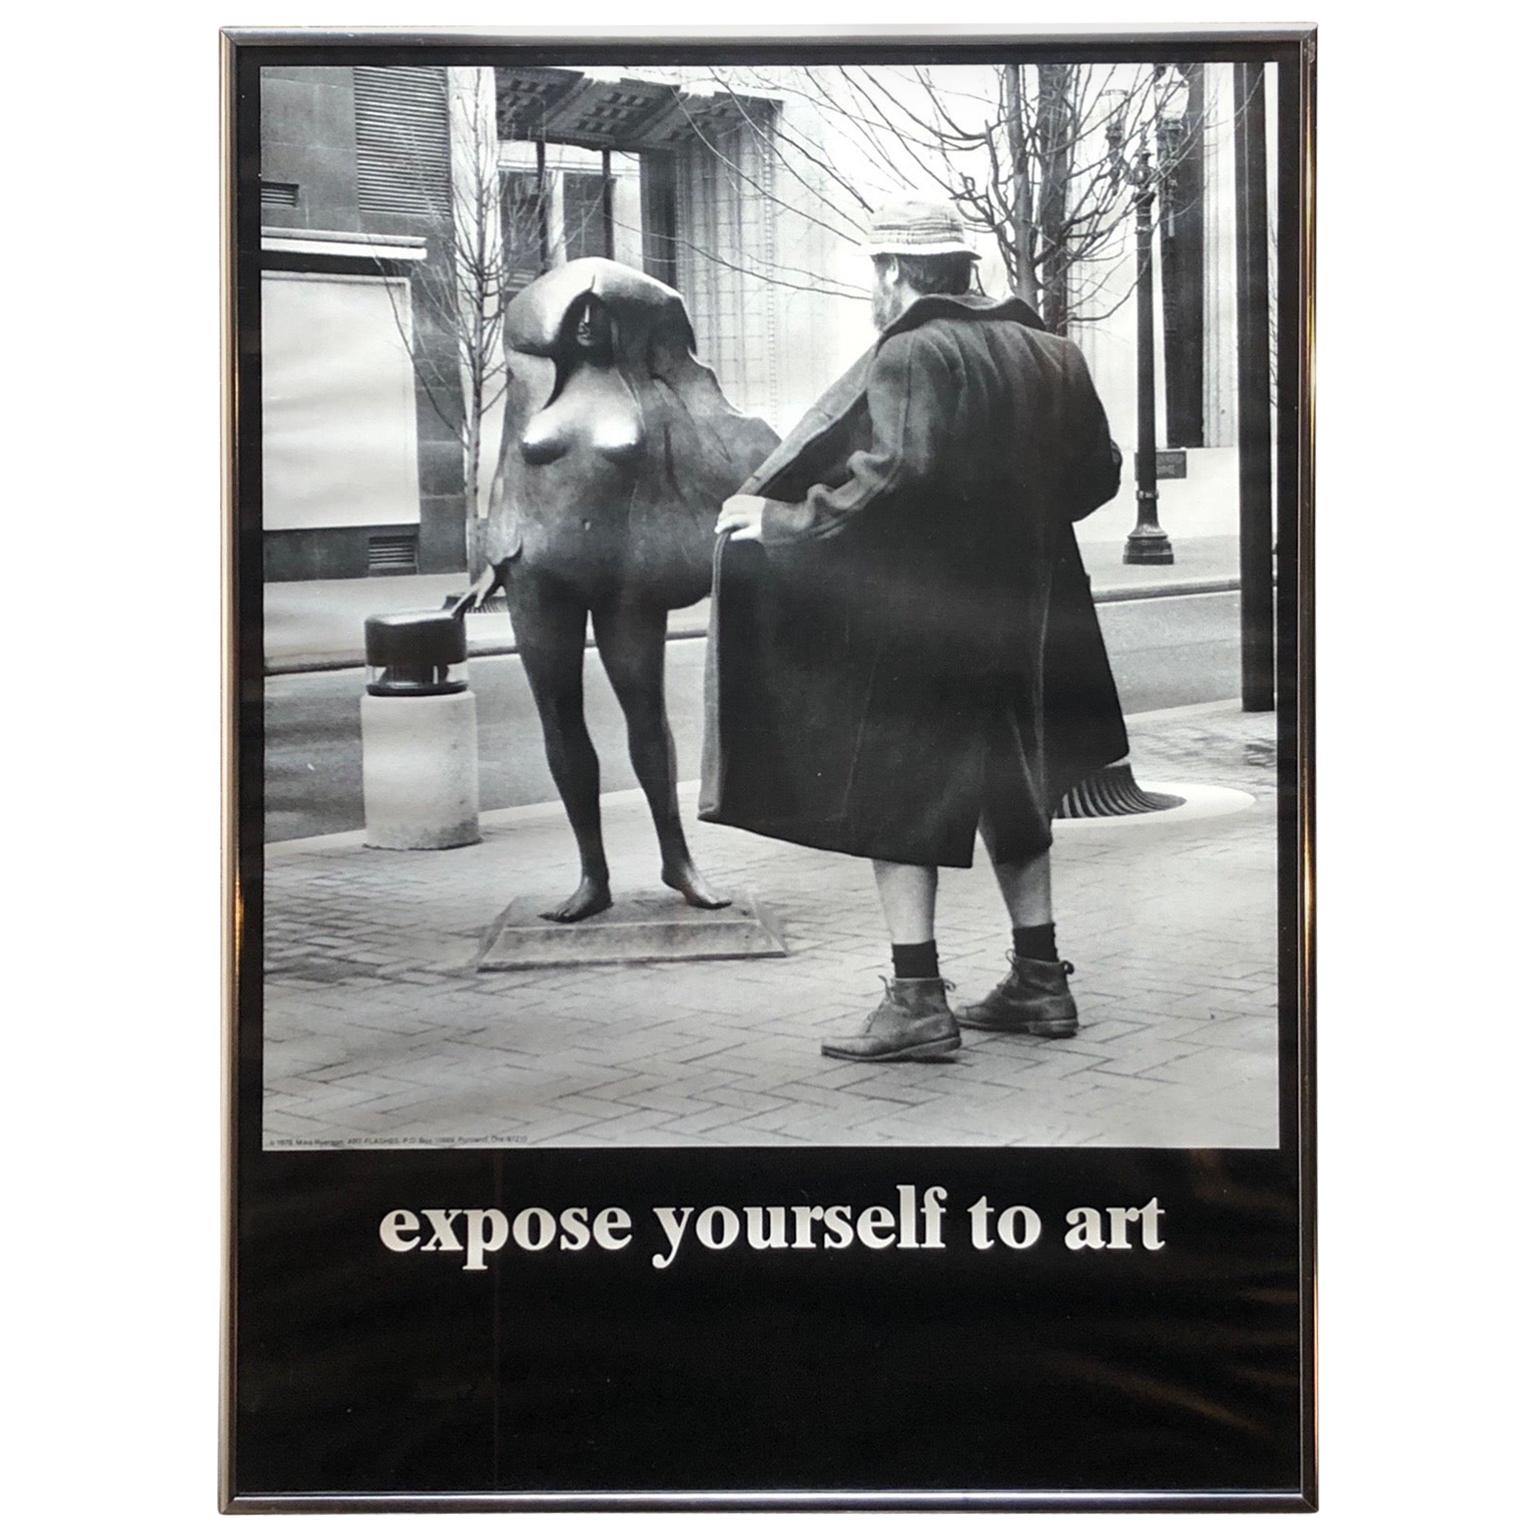 Vintage 1970s "Expose Yourself to Art" Framed Poster